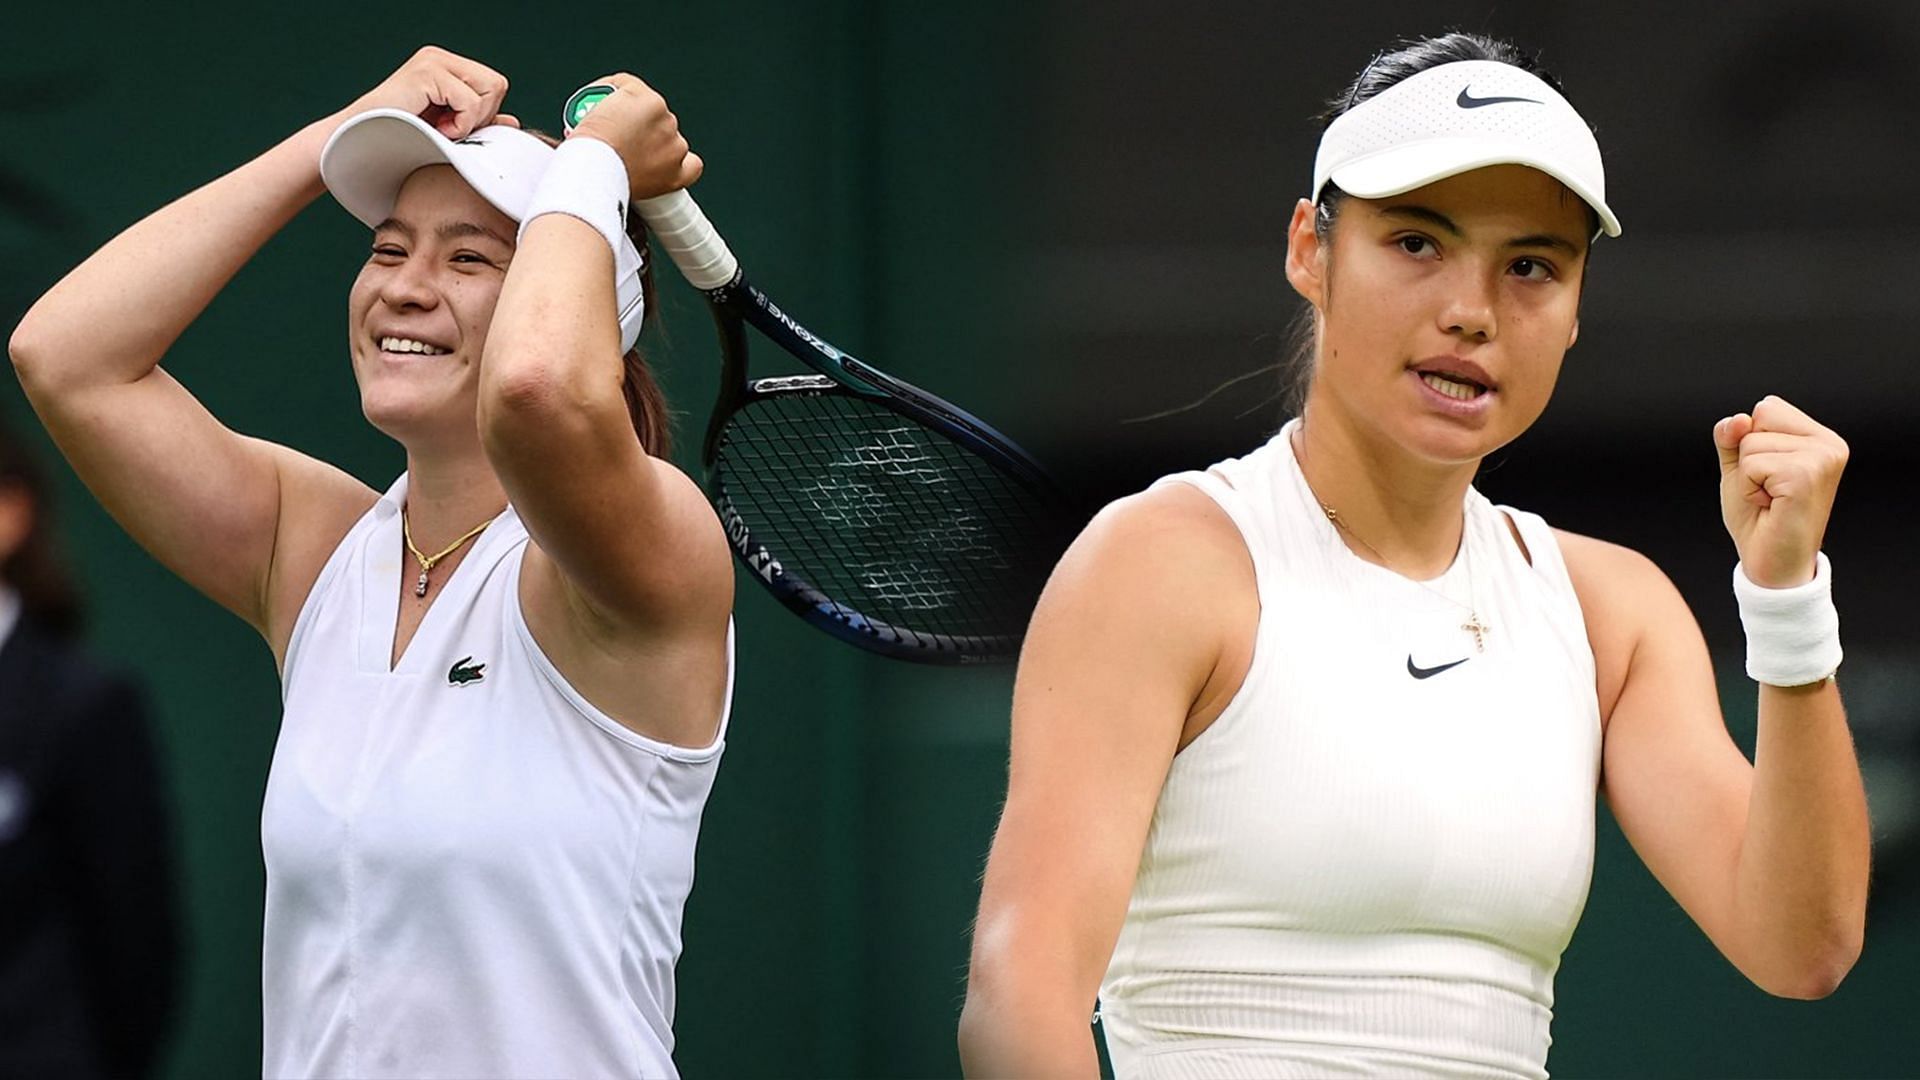 WATCH: Emma Raducanu's Wimbledon 4R opponent Lulu Sun 'training with a cow' during her up-and-coming days resurfaces ahead of SW19 battle